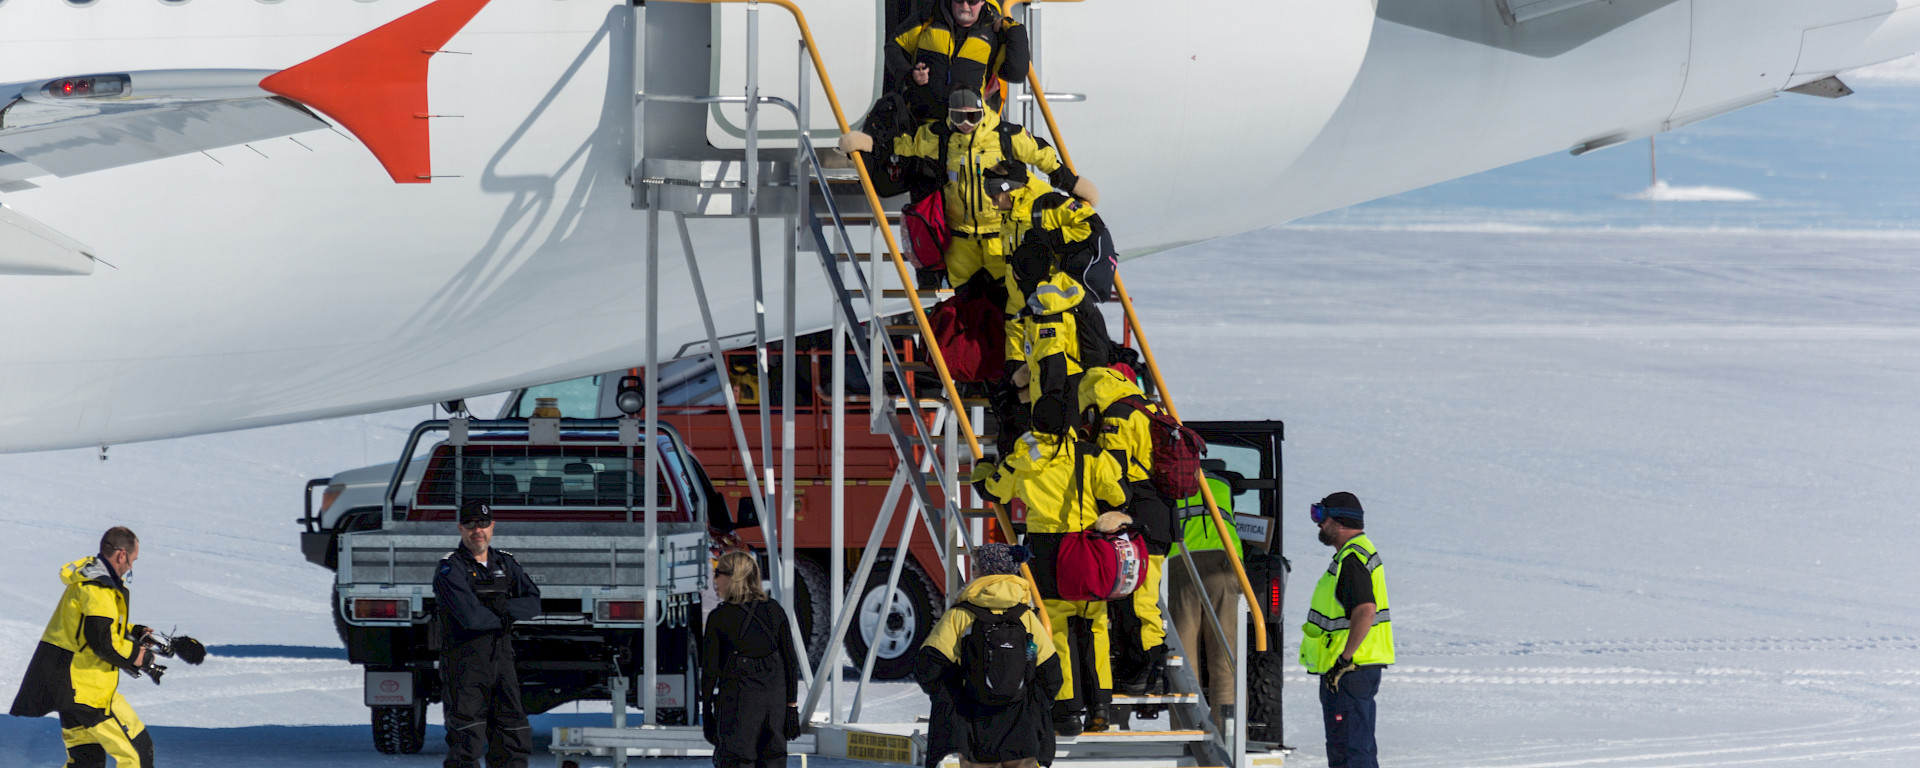 Passengers boarding gangway of aircraft on ice runway